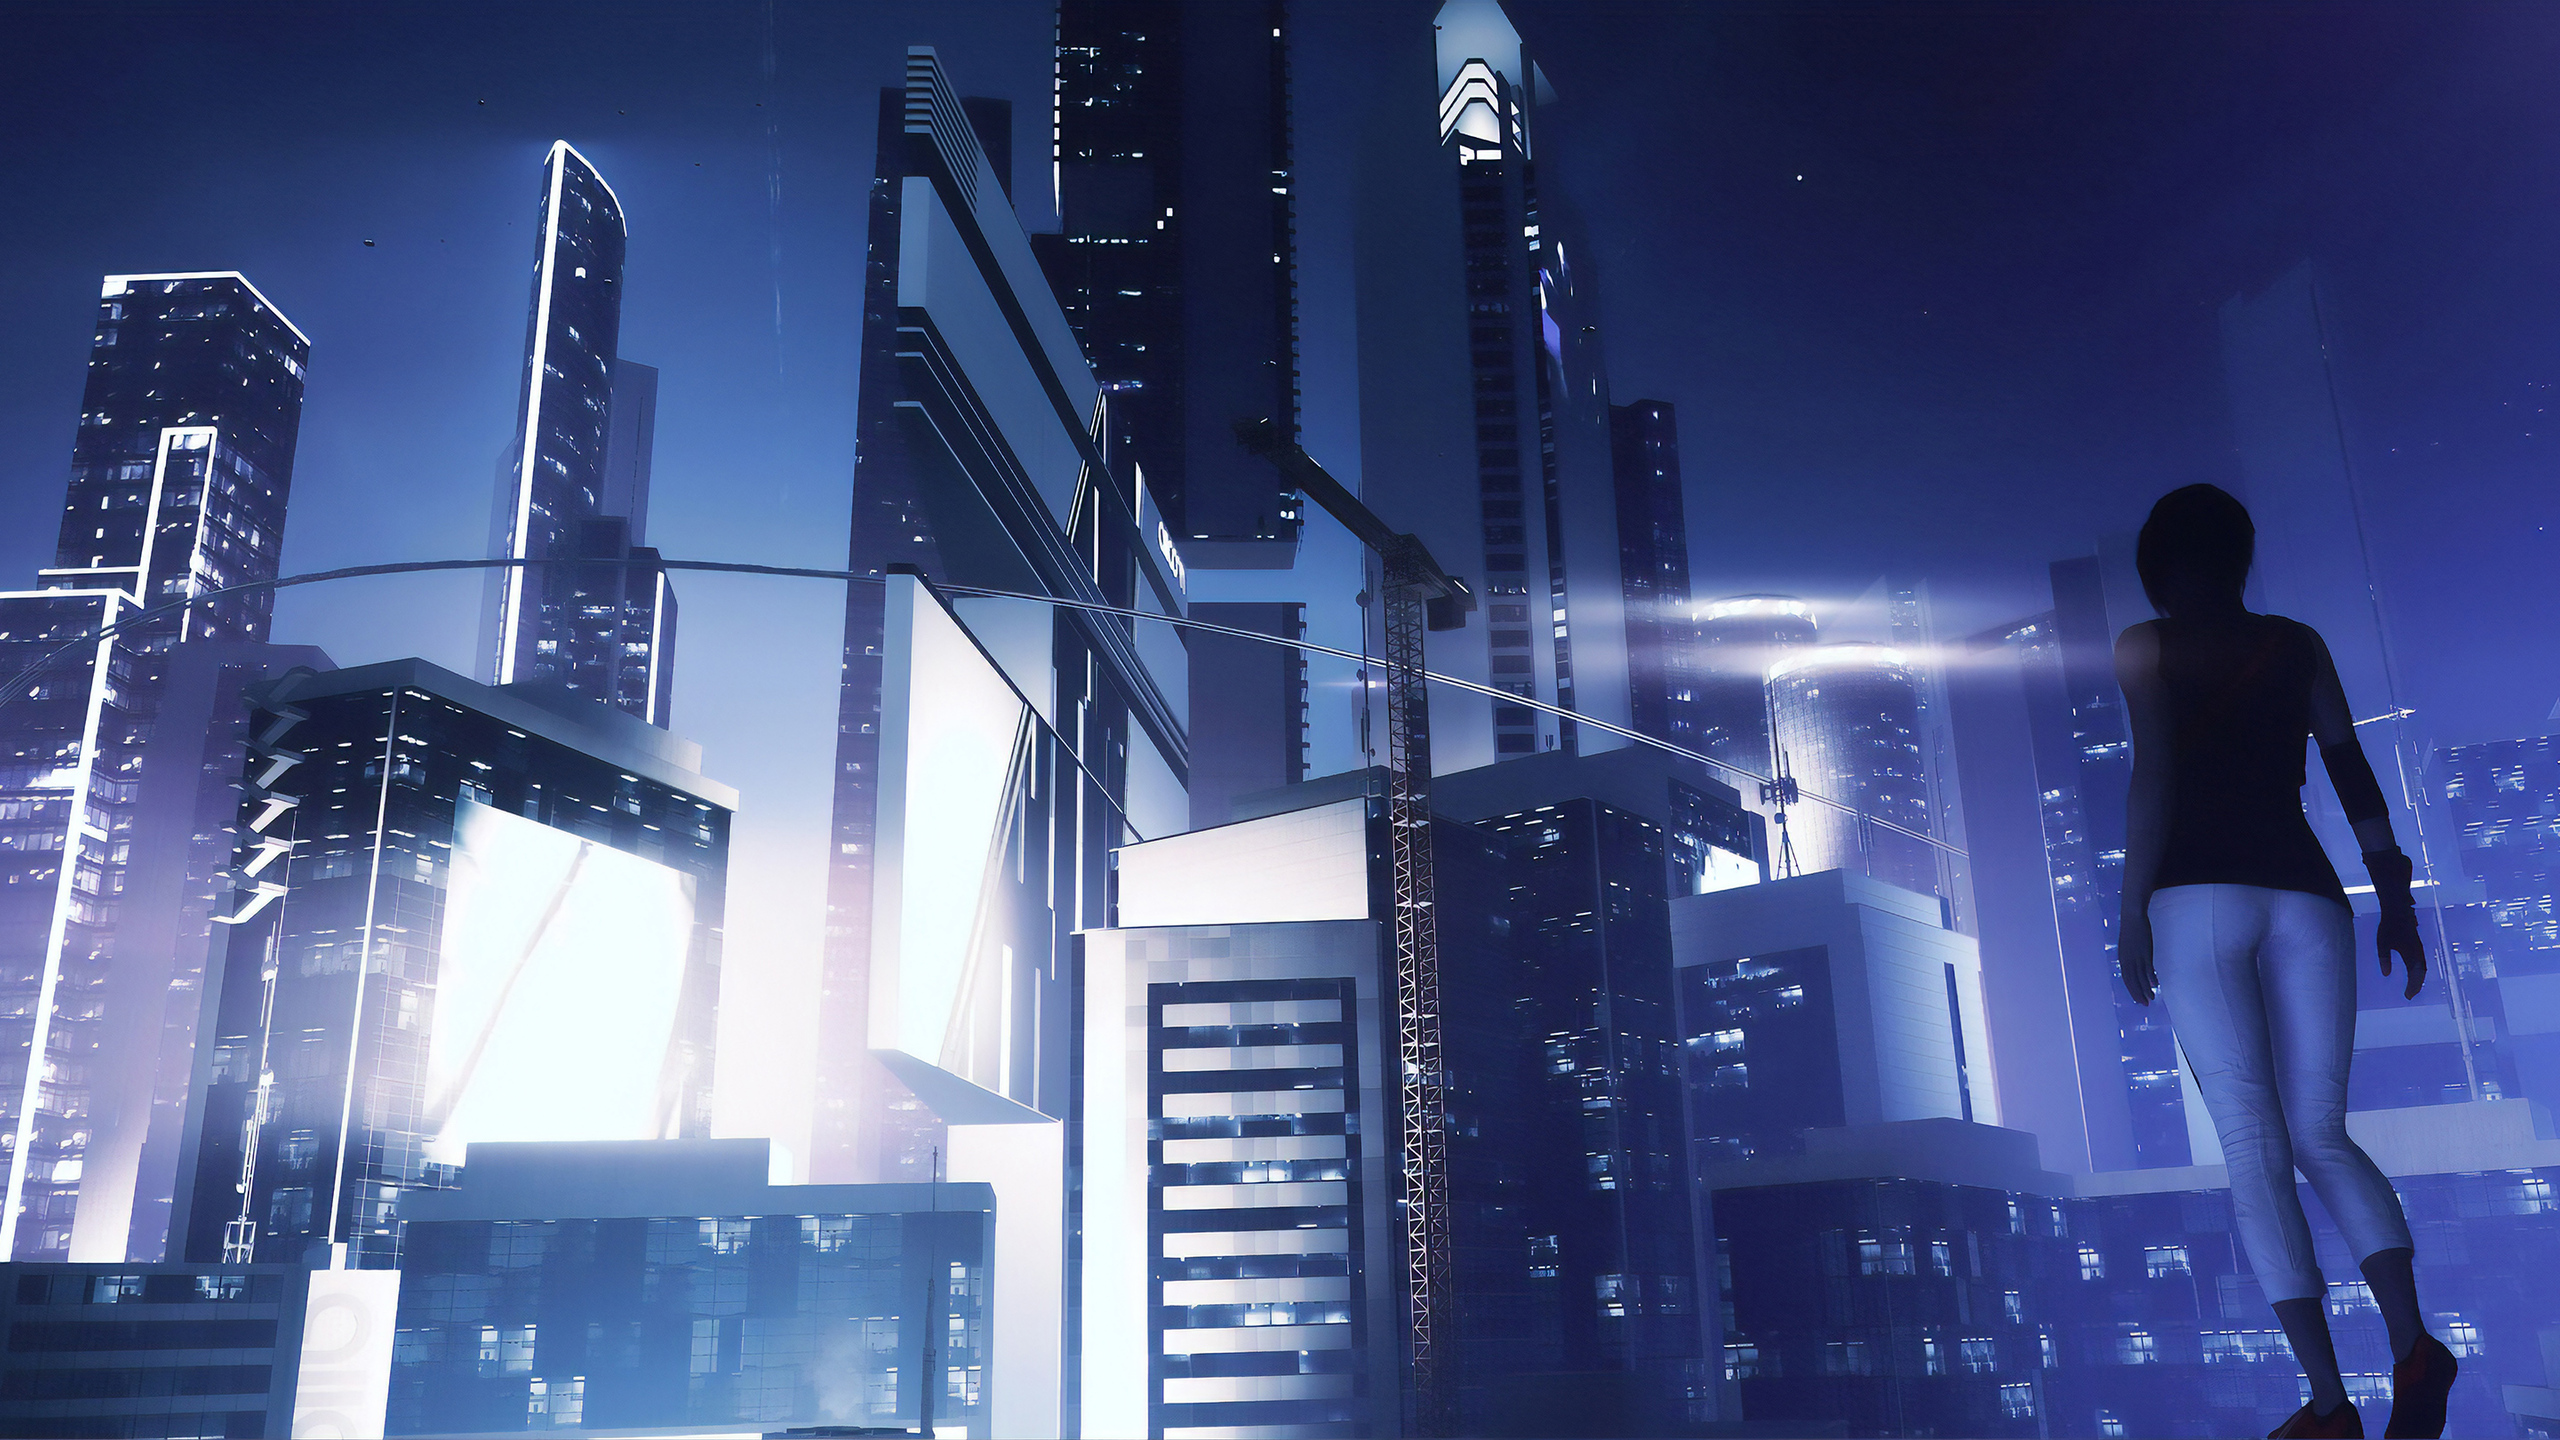 Mirrors Edge Catalyst 1440p abstract wallpaper RE by TheSyanArt on